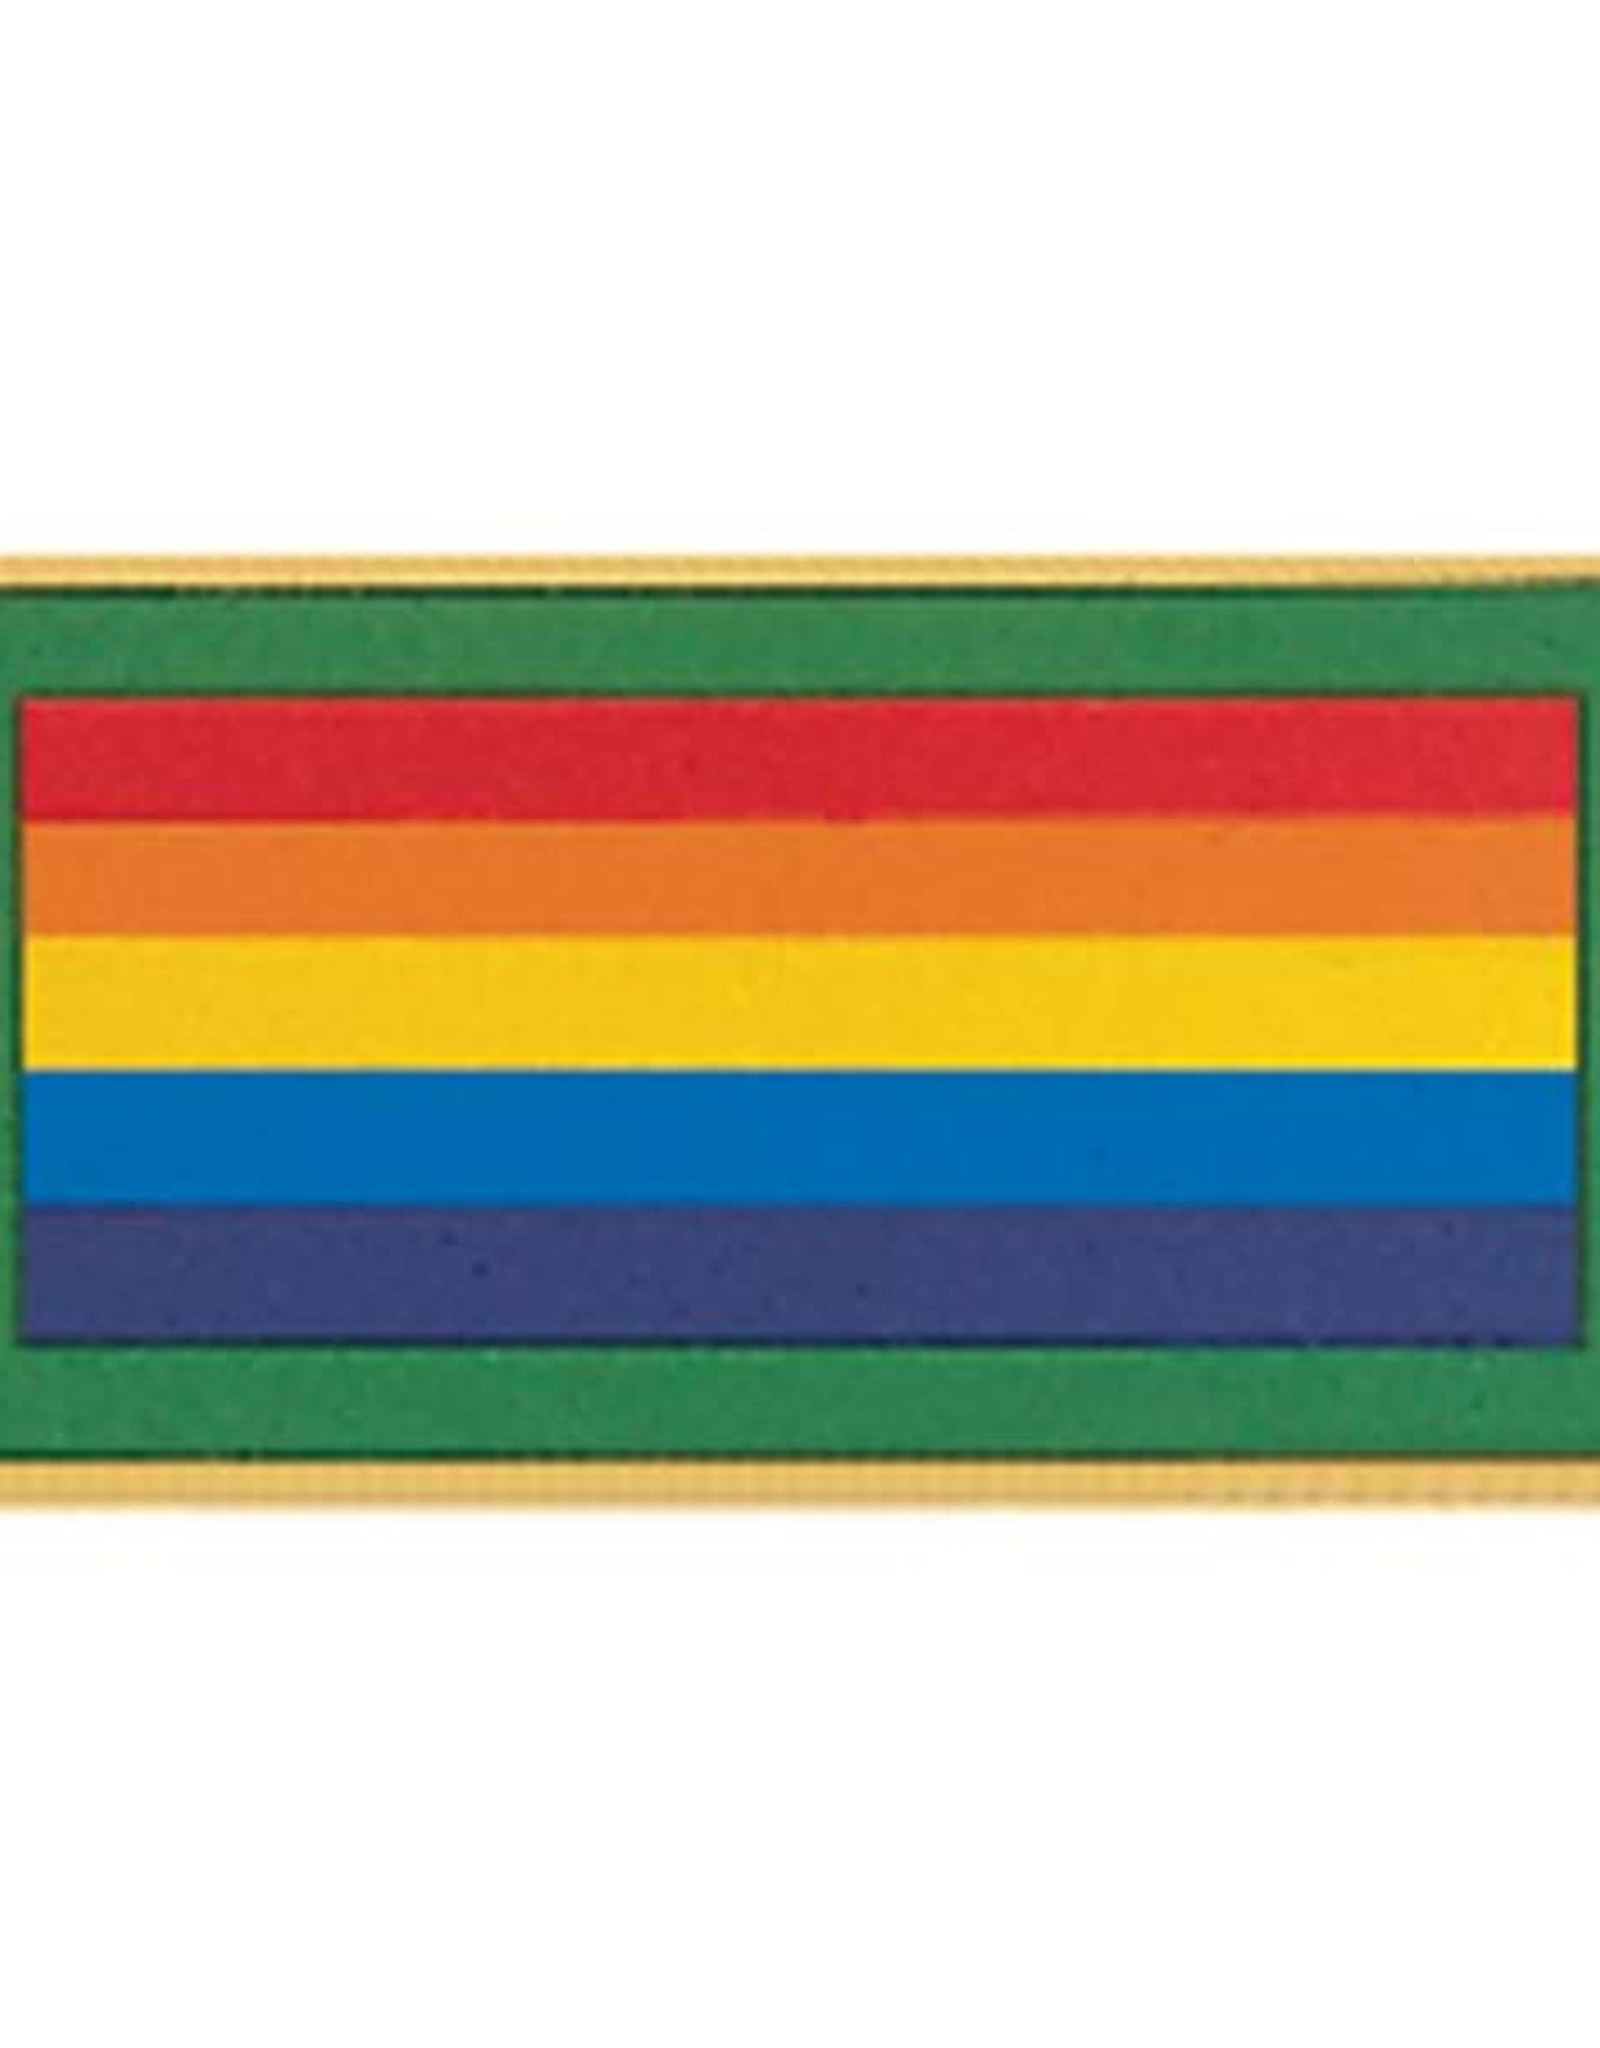 GIRL SCOUTS OF THE USA Bridge to Adult Girl Scouts Award Pin